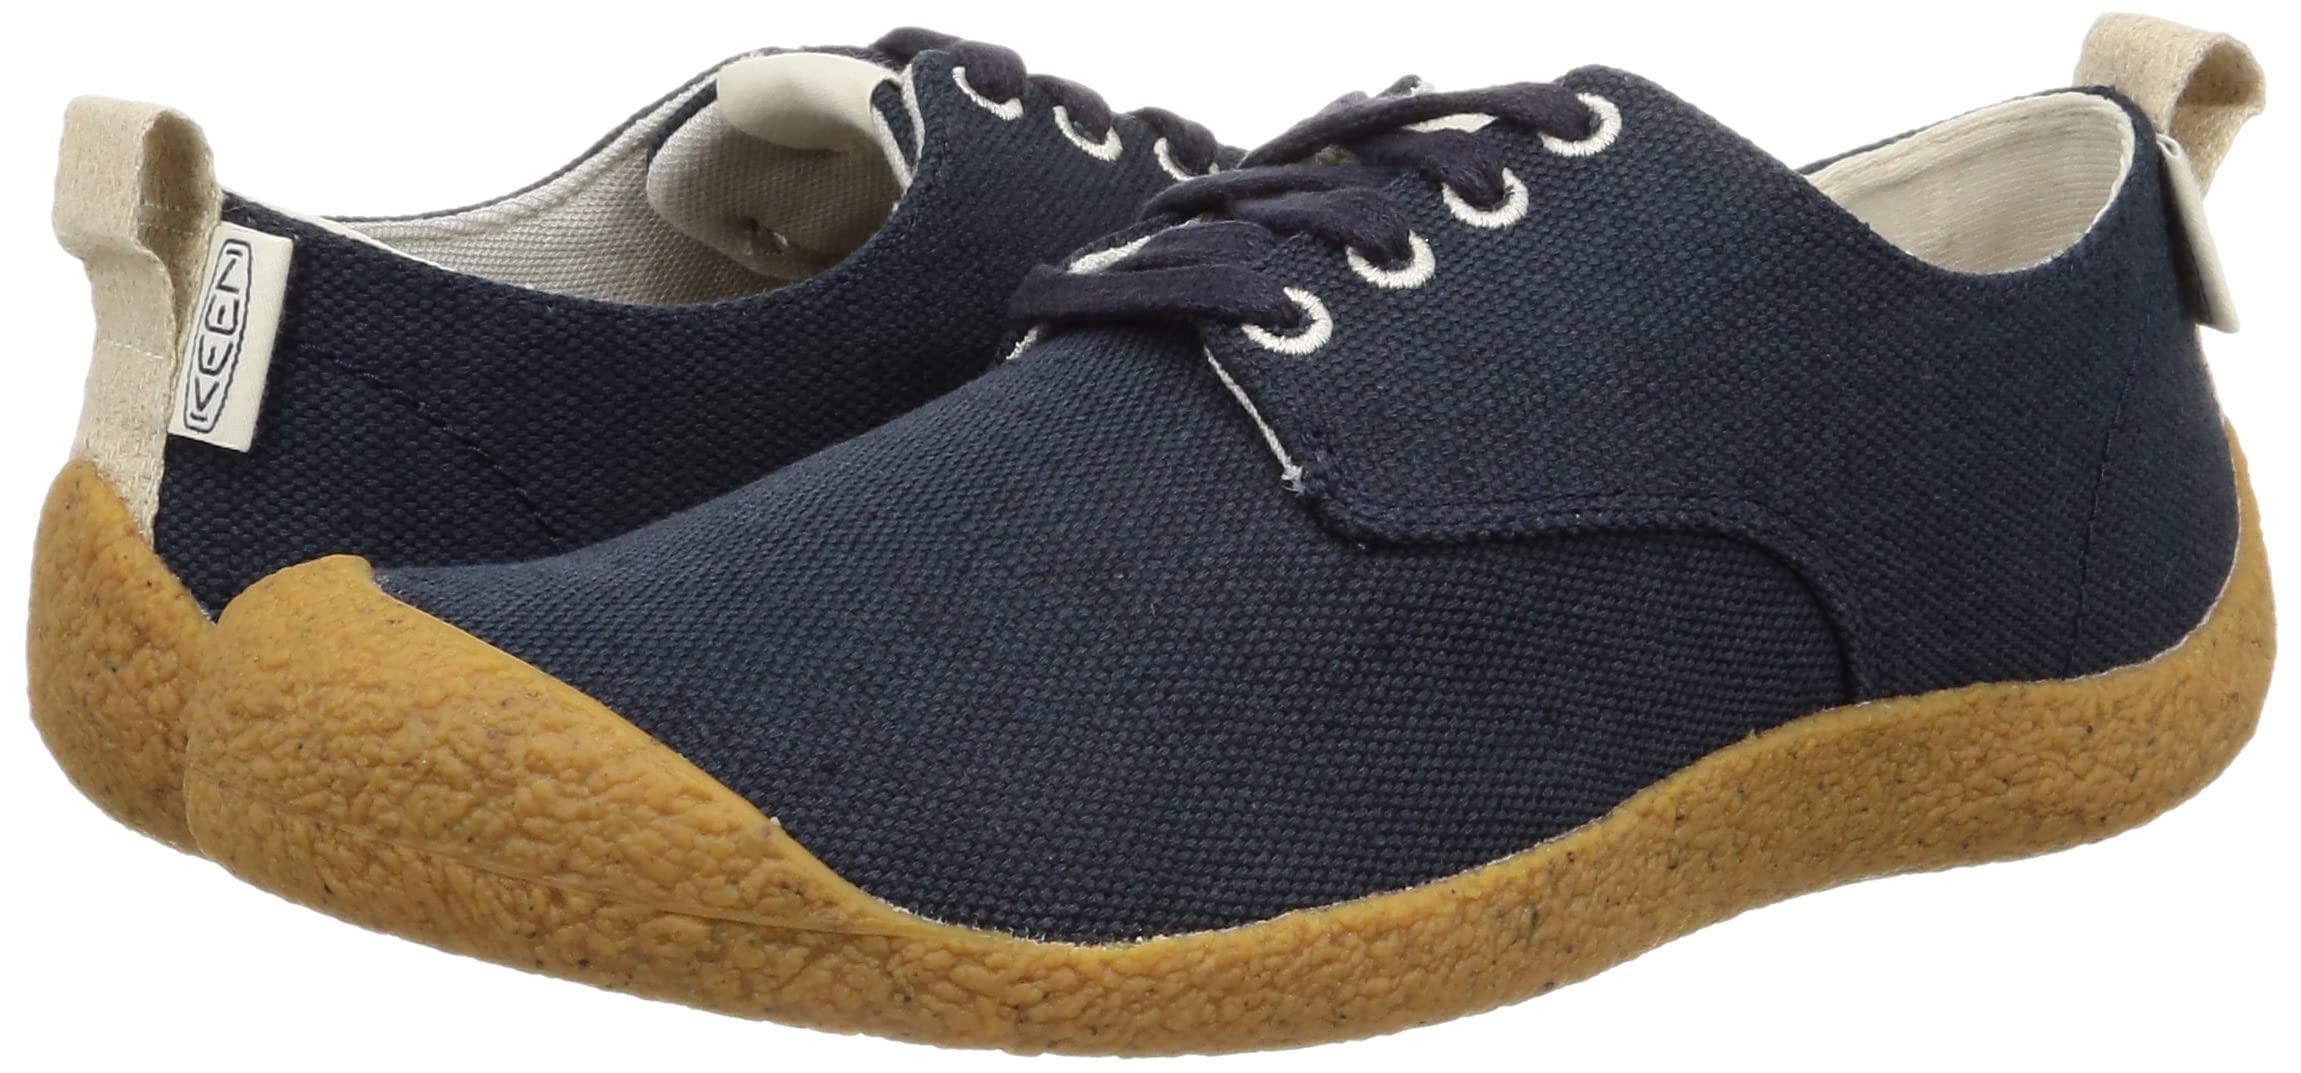 KEEN Men's Mosey Derby Low Height Casual Oxfords